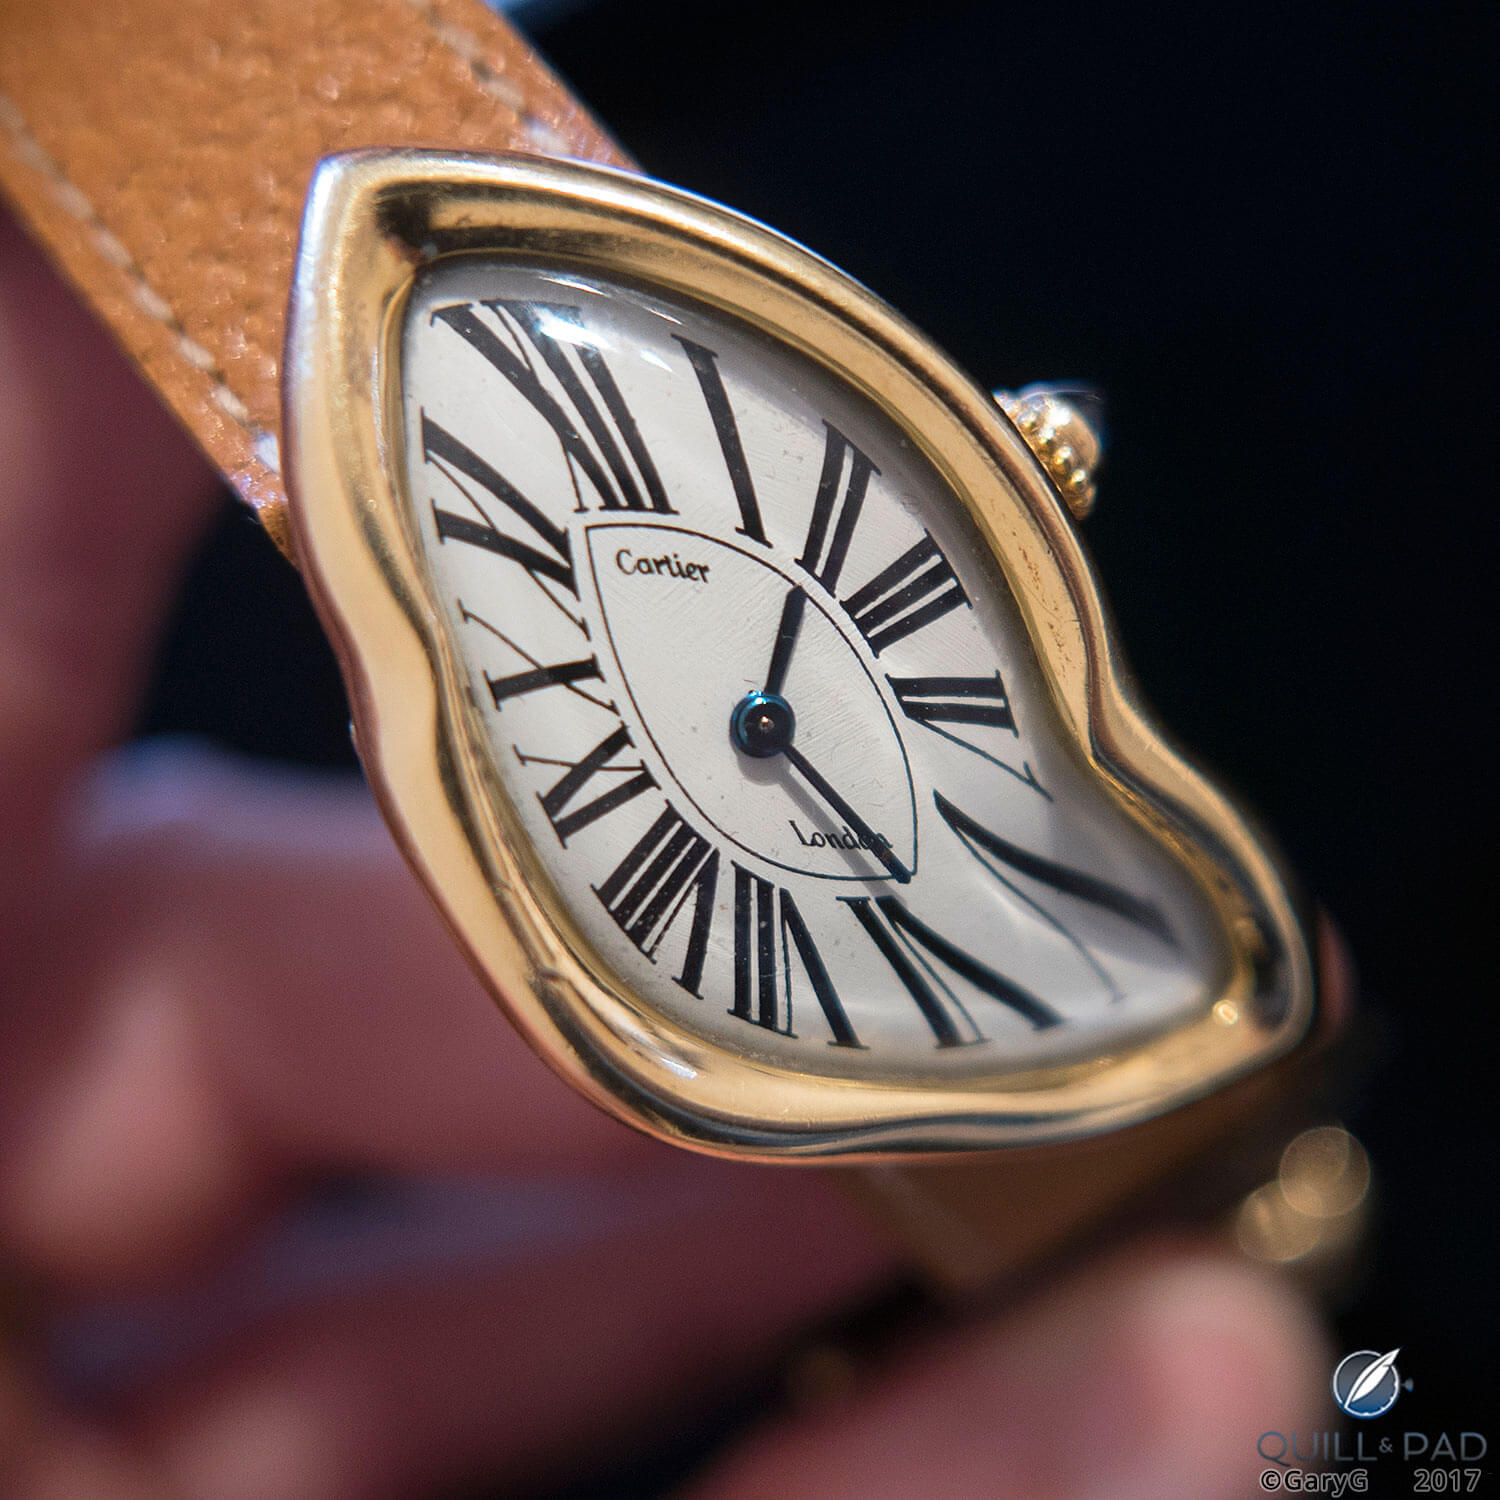 Every watch has a story: Cartier London Crush doubles its high estimate